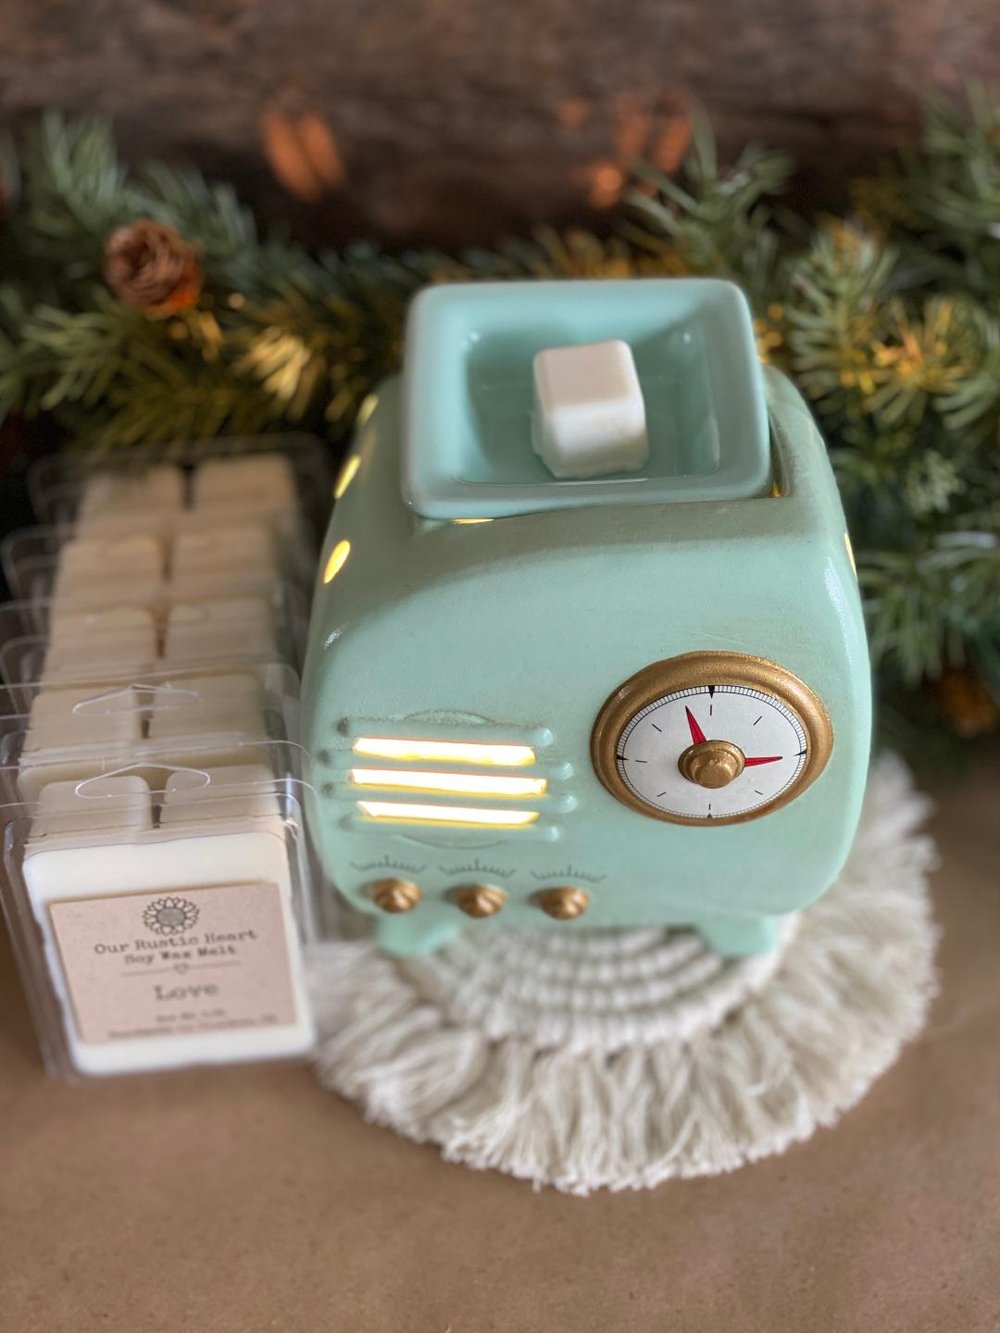 Tree of Life Warmer & Wax Melt Bundle — Our Rustic Heart Candle Co.